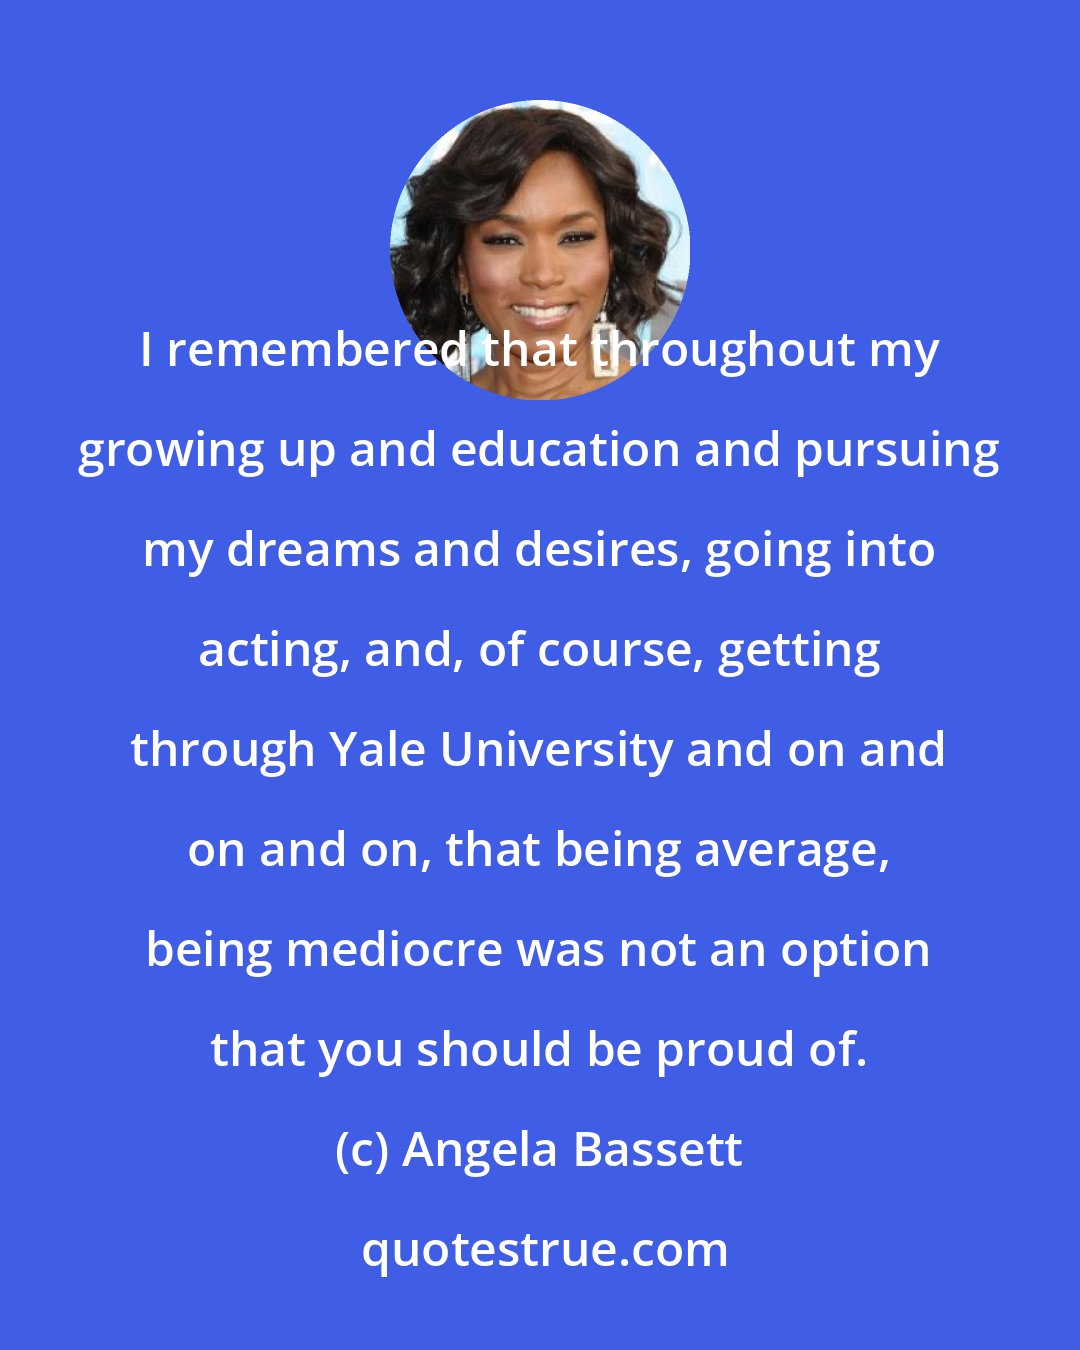 Angela Bassett: I remembered that throughout my growing up and education and pursuing my dreams and desires, going into acting, and, of course, getting through Yale University and on and on and on, that being average, being mediocre was not an option that you should be proud of.